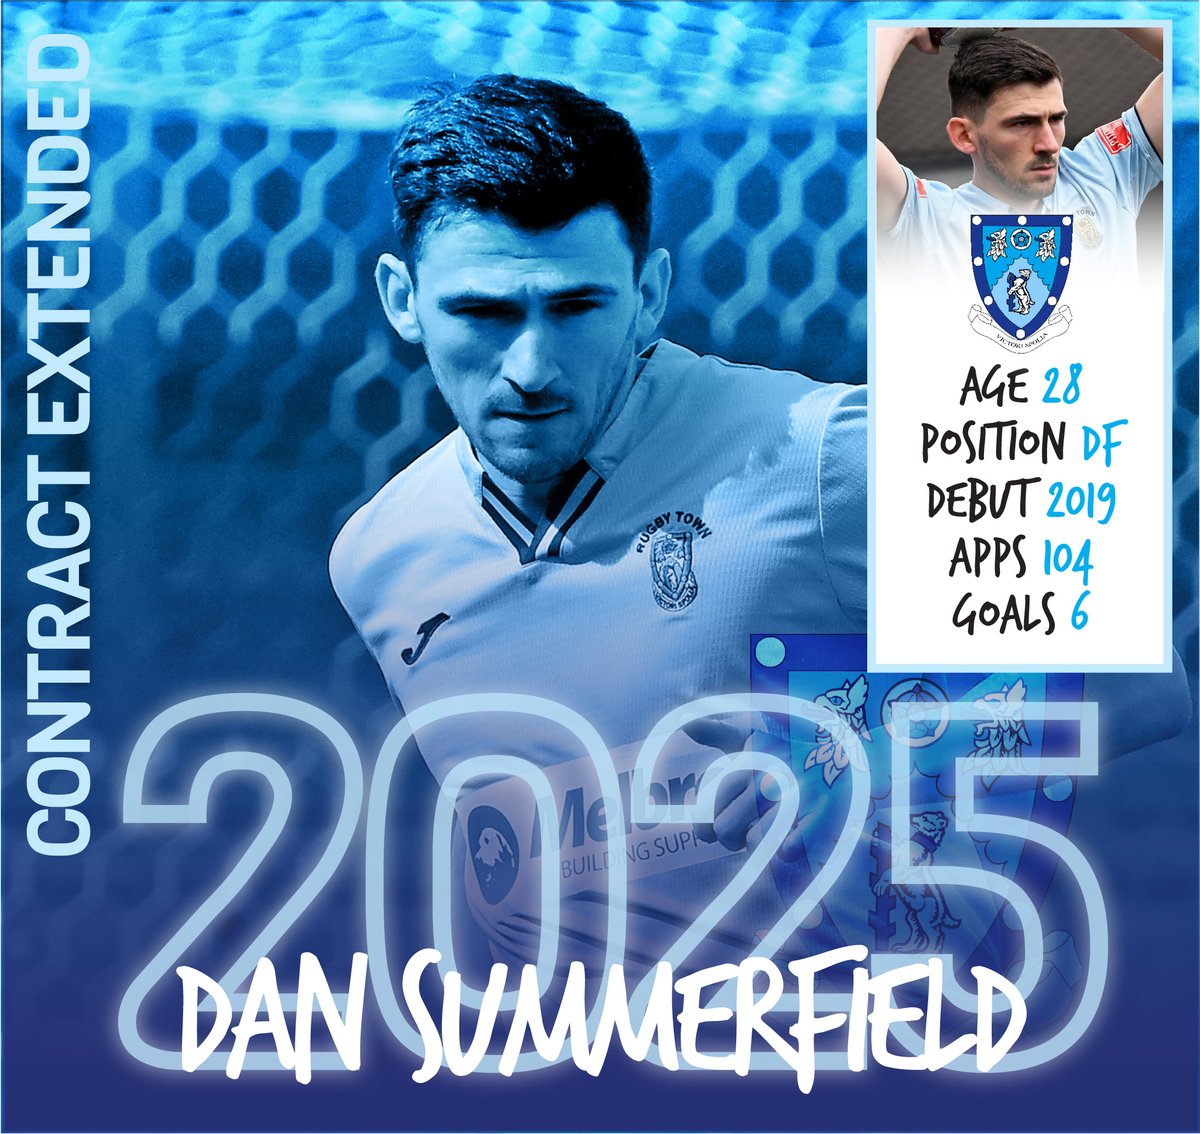 🖋️ We have extended the contract of defender Dan Summerfield until May 2025. 💪 @dansummers23 surpassed the 100 appearance-mark in a Valley shirt last season - here's to 100 more! #utv